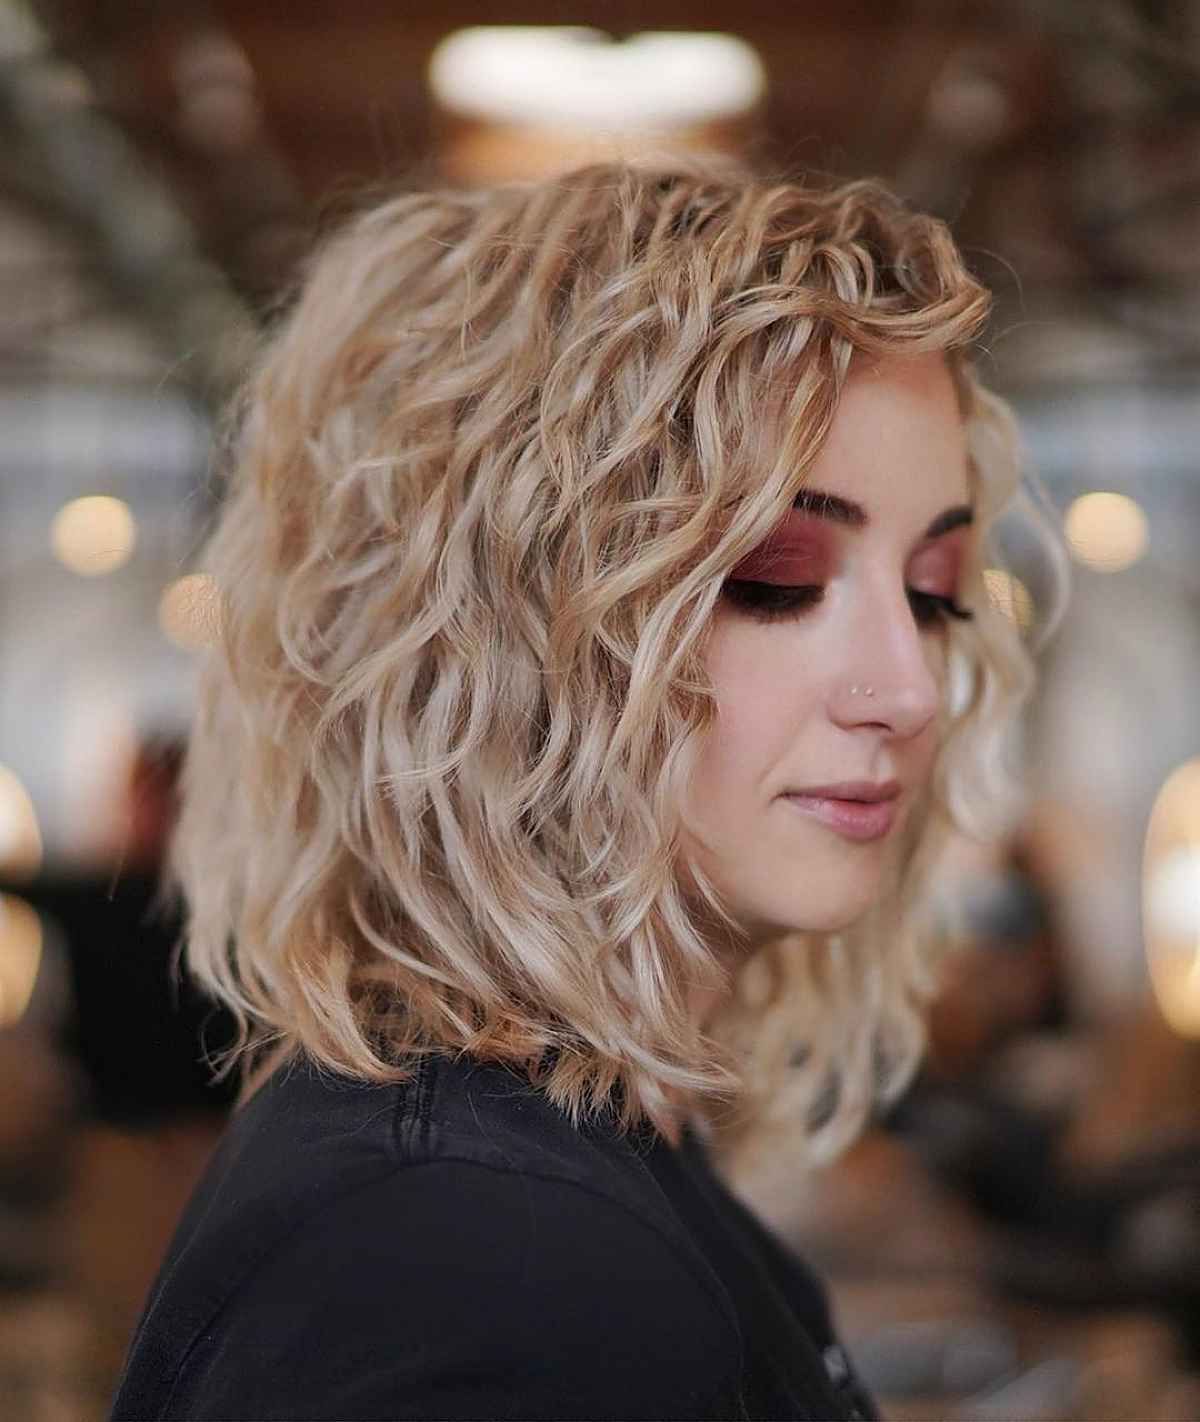 21 Stunning Long Curly Bob Haircuts – The Curly Lob Inside 2018 Curly Lob Haircuts With Feathered Ends (View 7 of 25)